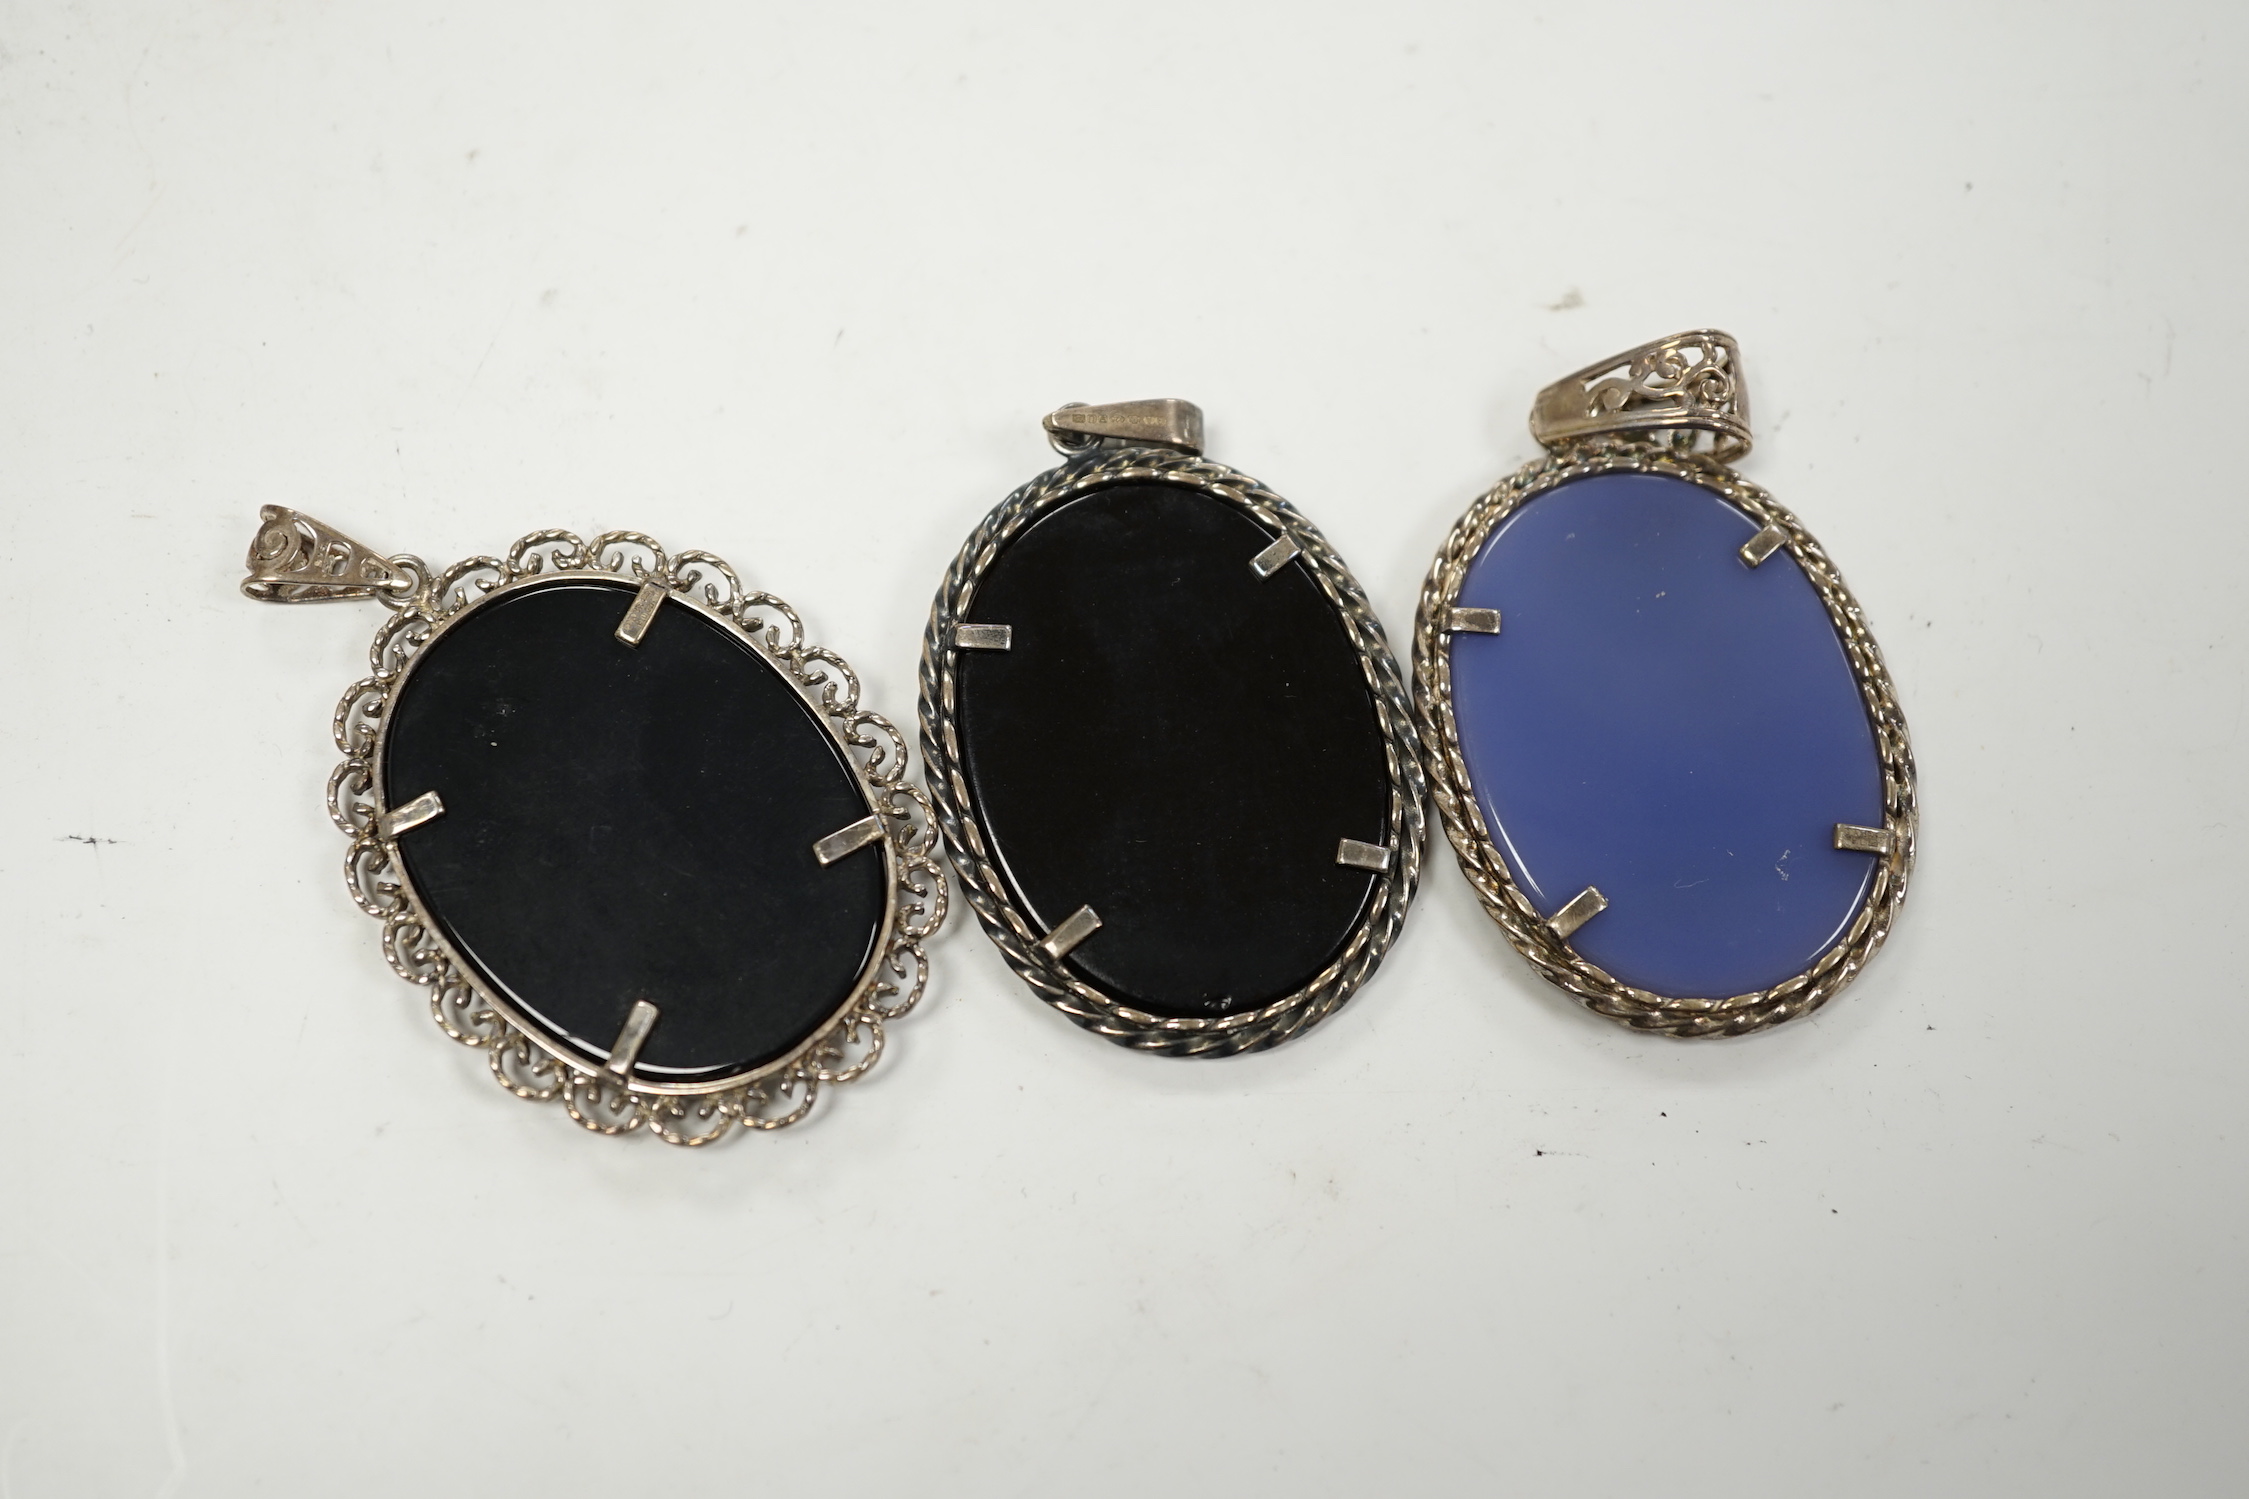 Three modern 925 or silver mounted Wedgwood style oval plaque pendants, 42mm.